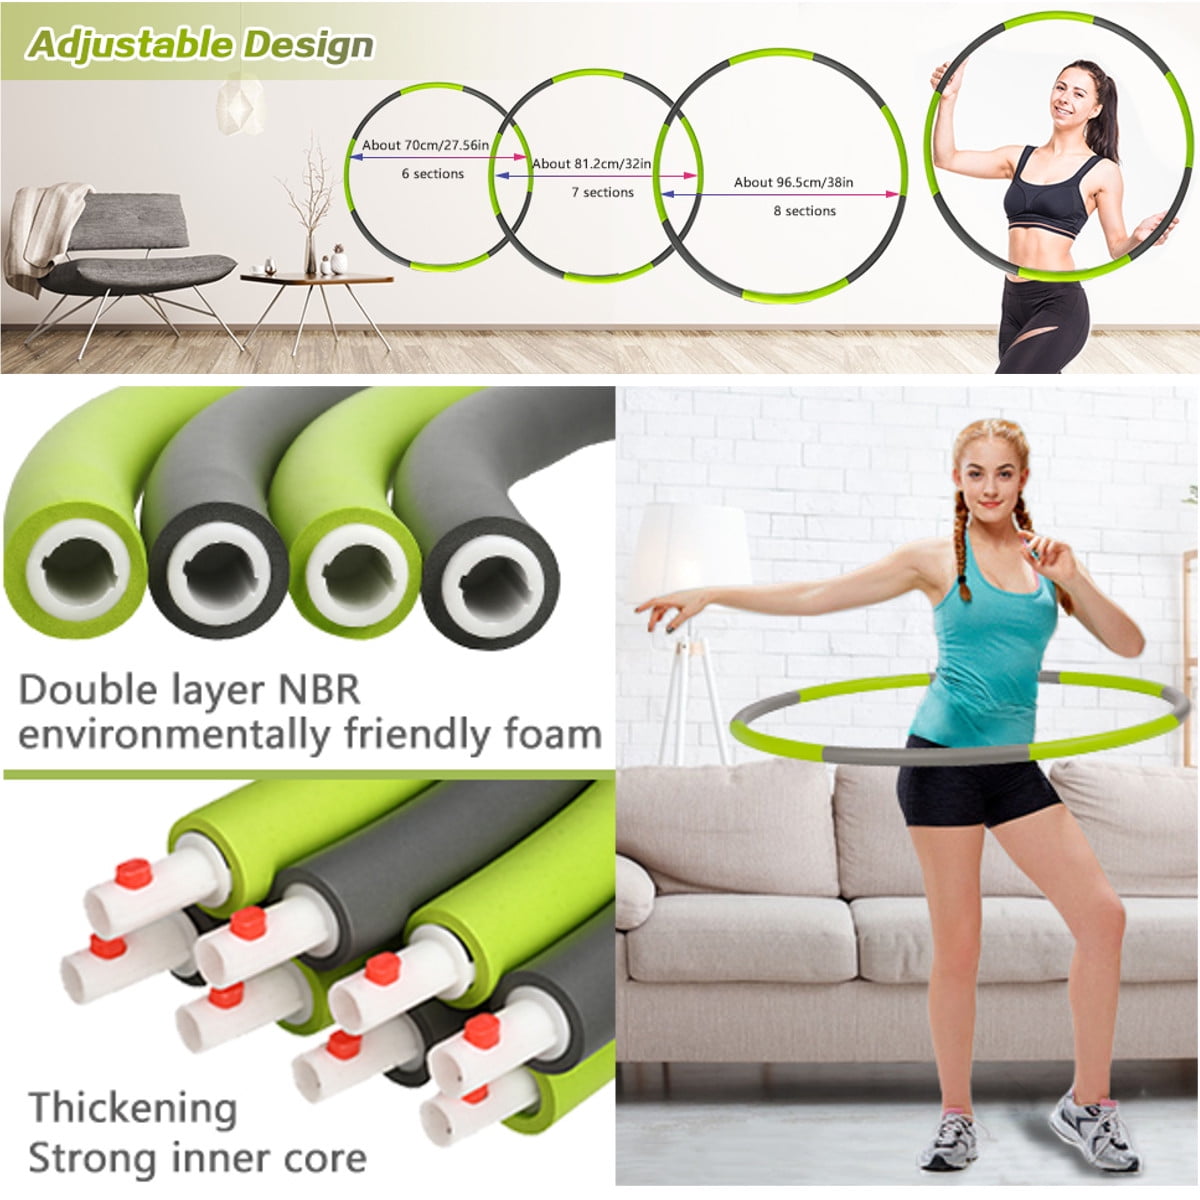 Weighted Hula Hoops for Adults Body Weight Loss with Skipping Rope and Carrying Bag Weight Adjustable and Portable Soft Foam with 8 Detachable Sections Exercise Hula Hoop 